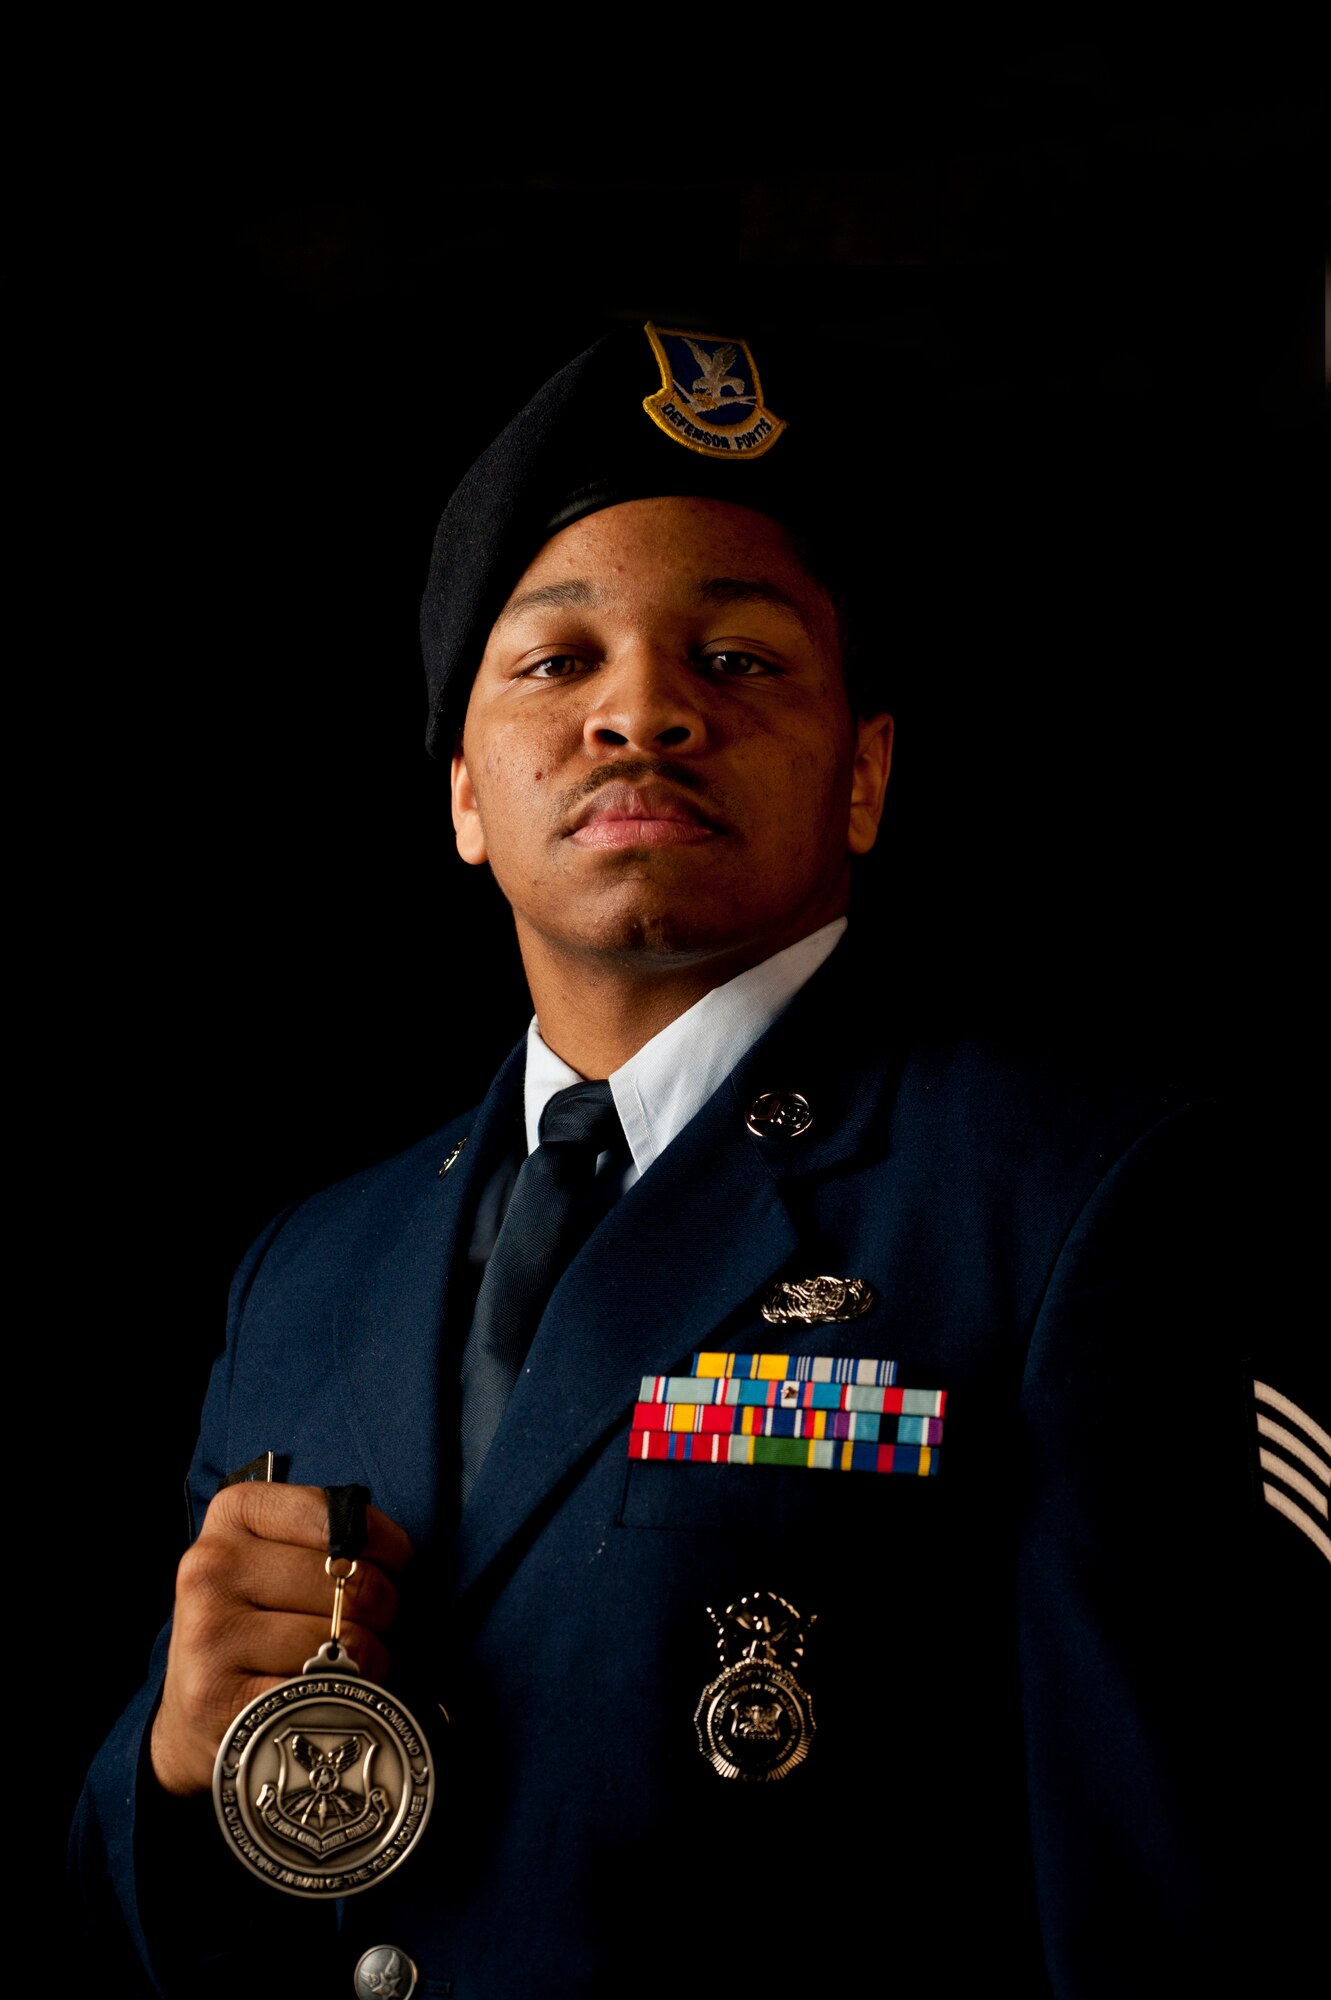 Staff Sgt. David Wallace III, 91st Security Forces Group plans and programs section, poses for a photo at Minot Air Force Base, N.D., May 9, 2014. Wallace was named one of 12 Outstanding Airmen of the Year for 2014. (U.S. Air Force photo/Senior Airman Brittany Y. Auld)